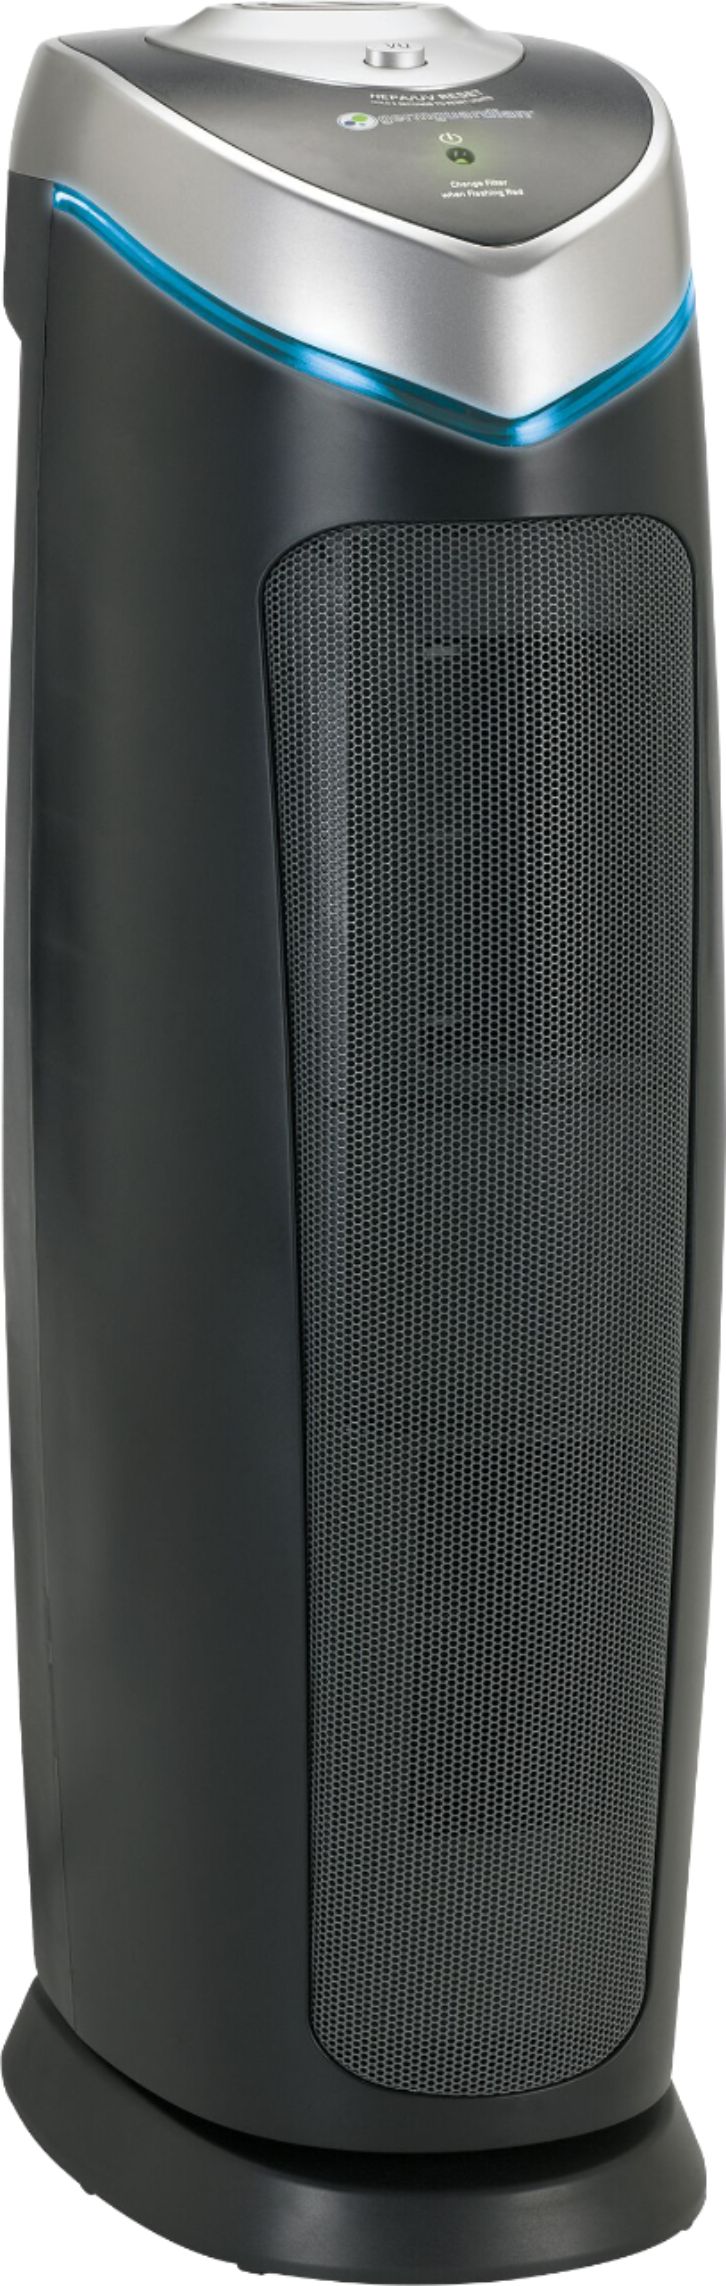 Angle View: GermGuardian - 22" Air Purifier Tower with True HEPA Pure Filter & UV-C for 743 Sq Ft Rooms - Black/Silver